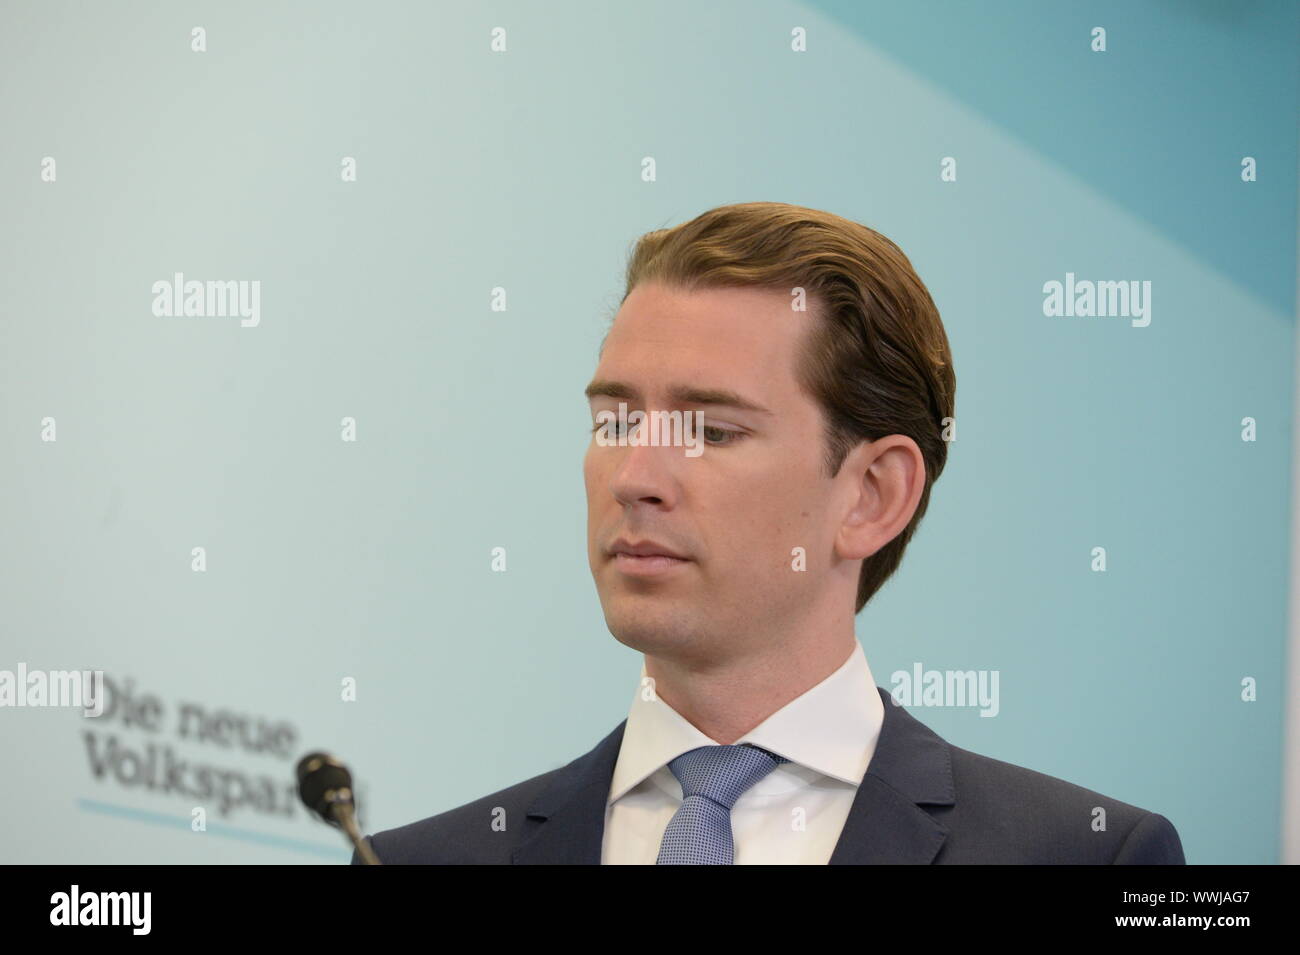 Vienna, Austria. 16th September, 2019. PRESS CONFERENCE on Presentation '100 projects for Austria' Part 2: Justice with federal party chairman Sebastian Kurz (List Sebastian Kurz, New People's Party) on 16 September 2019. Credit: Franz Perc/Alamy Live News Stock Photo